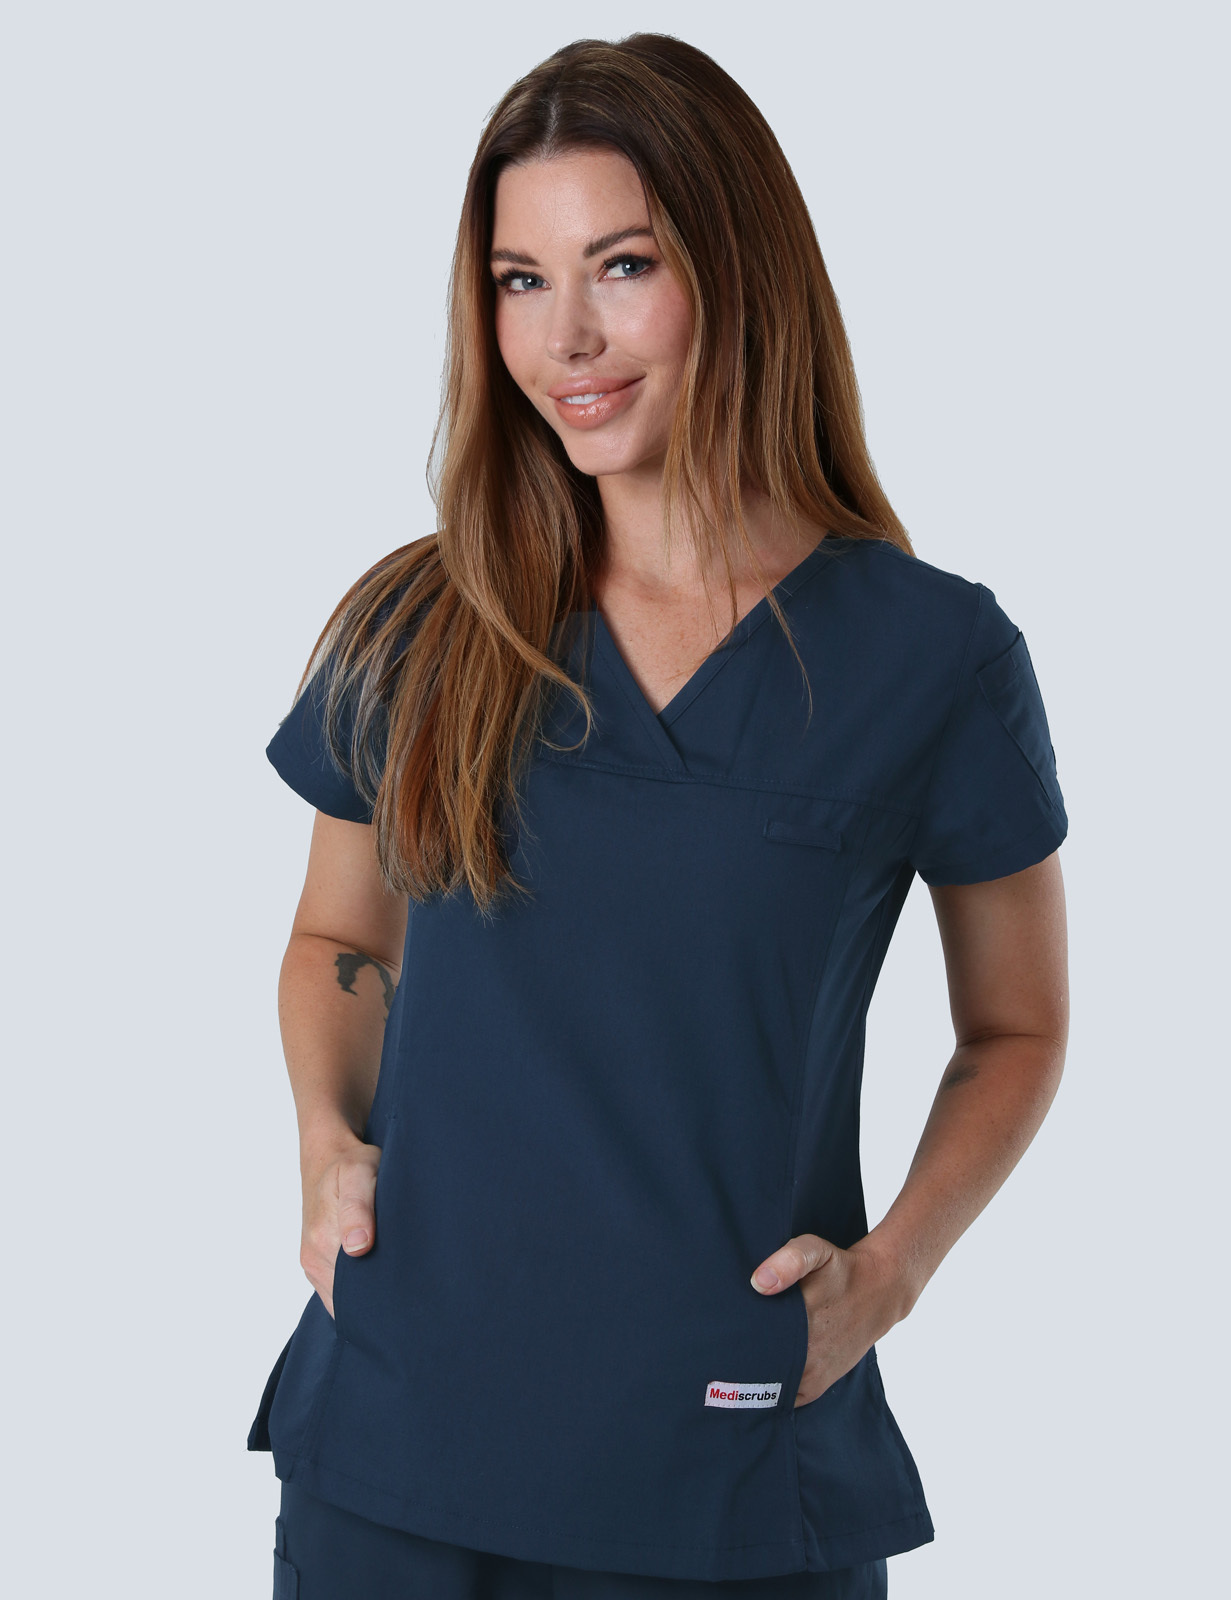 PAH - Infectious Diseases (Women's Fit Solid Scrub Top in Navy incl Logos)